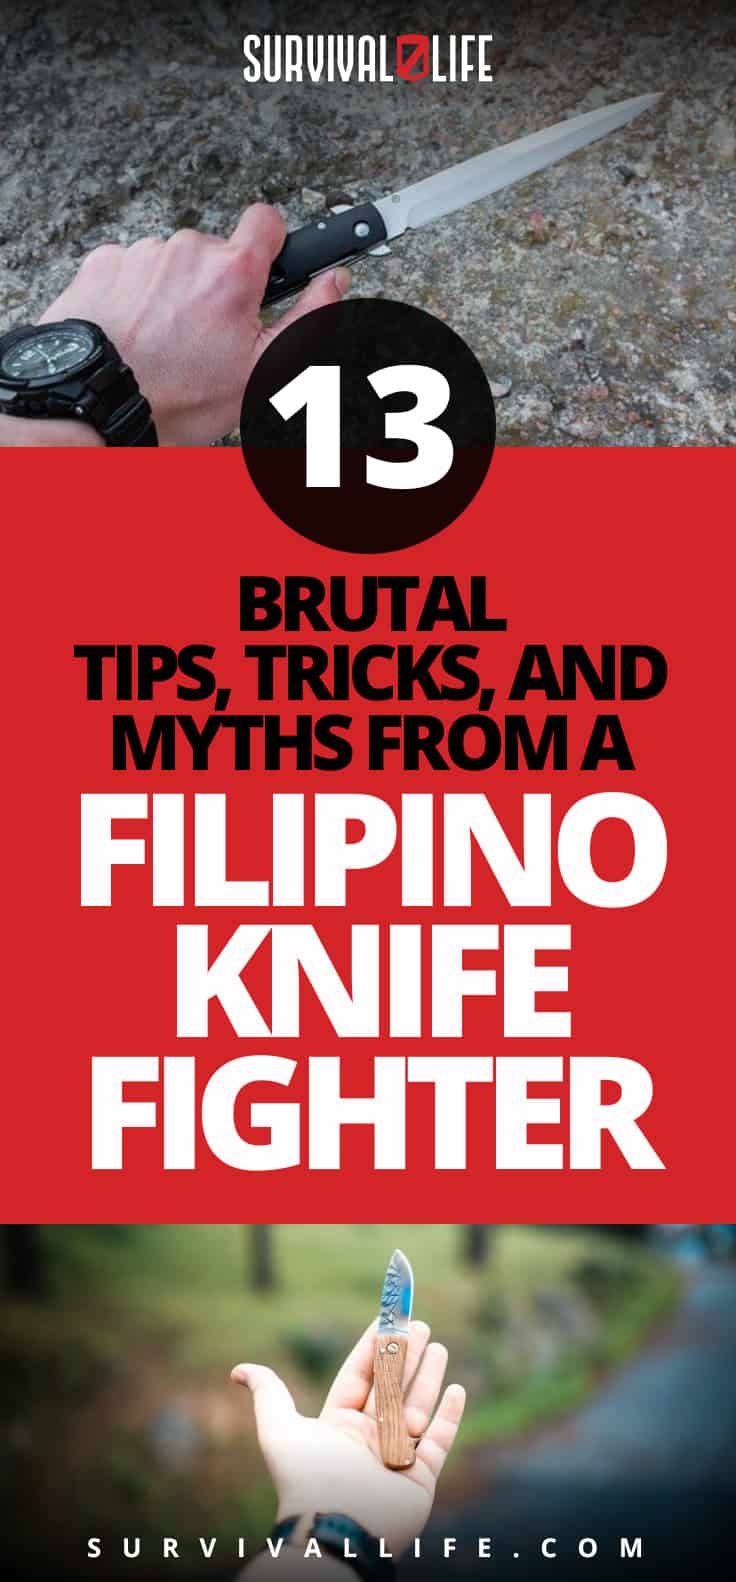 Brutal Tips, Tricks, And Myths from a Filipino Knife Fighter